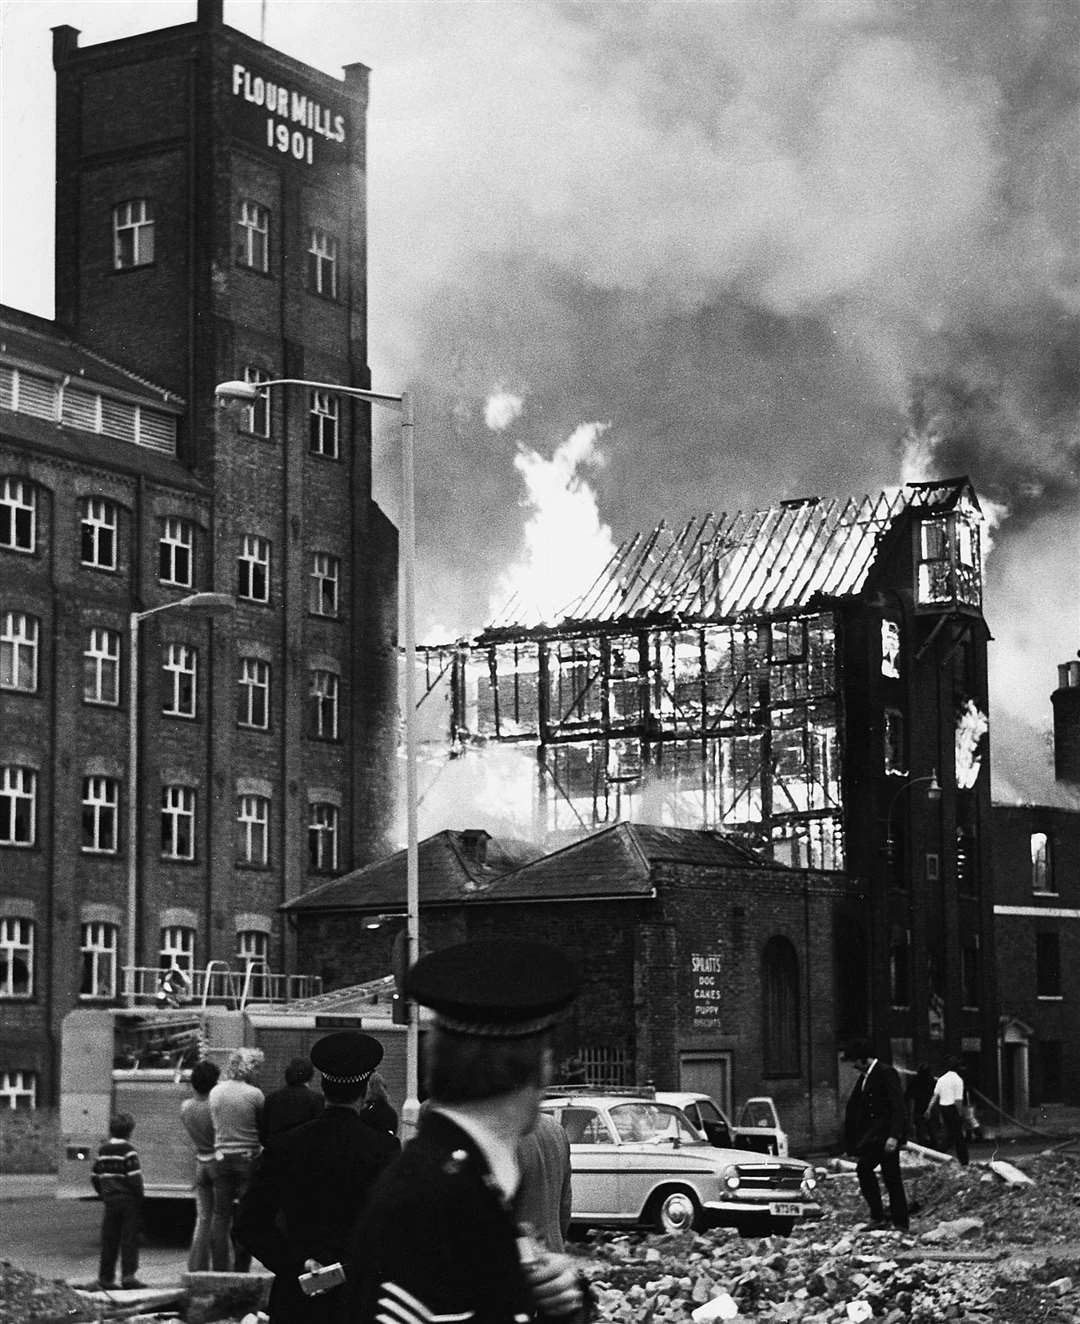 The site was hit by fire in May 1974